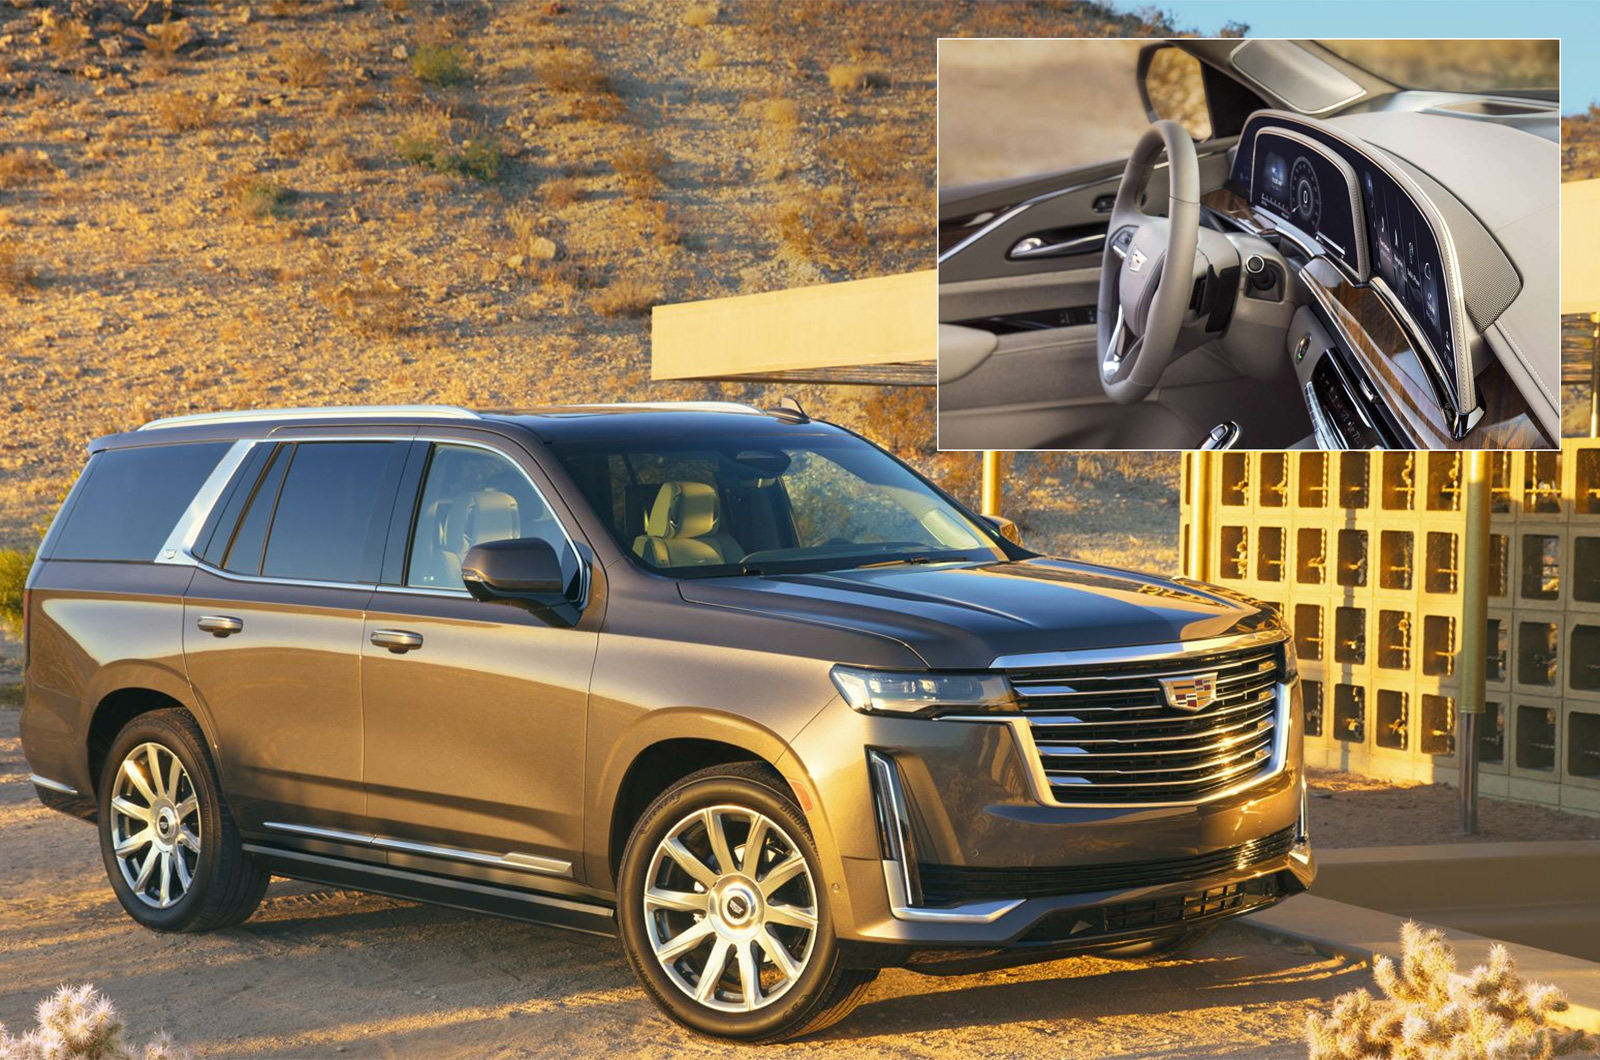 <p>Cadillac introduced the world’s first curved OLED screen to be placed in a car in the 2021 Cadillac Escalade, unveiled in early 2020. The screen has twice the pixel density of a <strong>4K TV</strong>, and is bright enough to not require a hood over the screen (to give shade).</p><p><strong>GROUNDBREAKER SCORE: </strong>Too early to say, though doubtless they will become very common in the future.</p><p>Feature by <strong>Richard Dredge</strong>, with some additional content from <strong>Tom Evans</strong></p><p><em><strong>If you enjoyed this story, sign up to Autocar’s newsletter for all the best car news, reviews and opinion direct to your inbox. <a href="https://t2m.io/Tn1UZ0bZ">Click here to subscribe</a>.</strong></em></p>